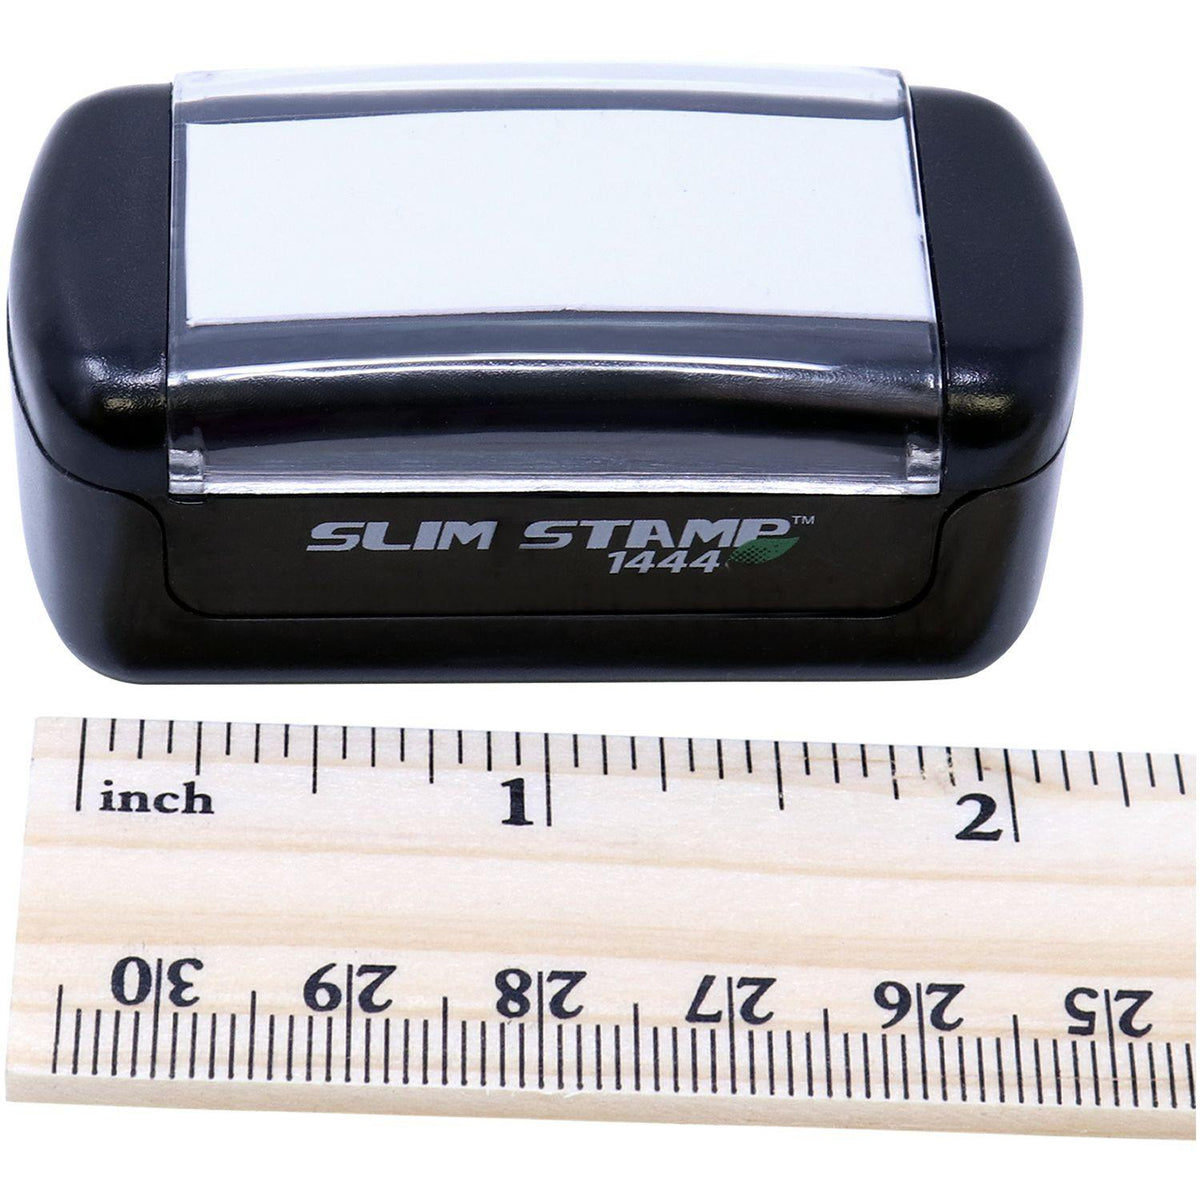 Slim Pre Inked Cash Stamp - Engineer Seal Stamps - Brand_Slim, Impression Size_Small, Stamp Type_Pre-Inked Stamp, Type of Use_Finance